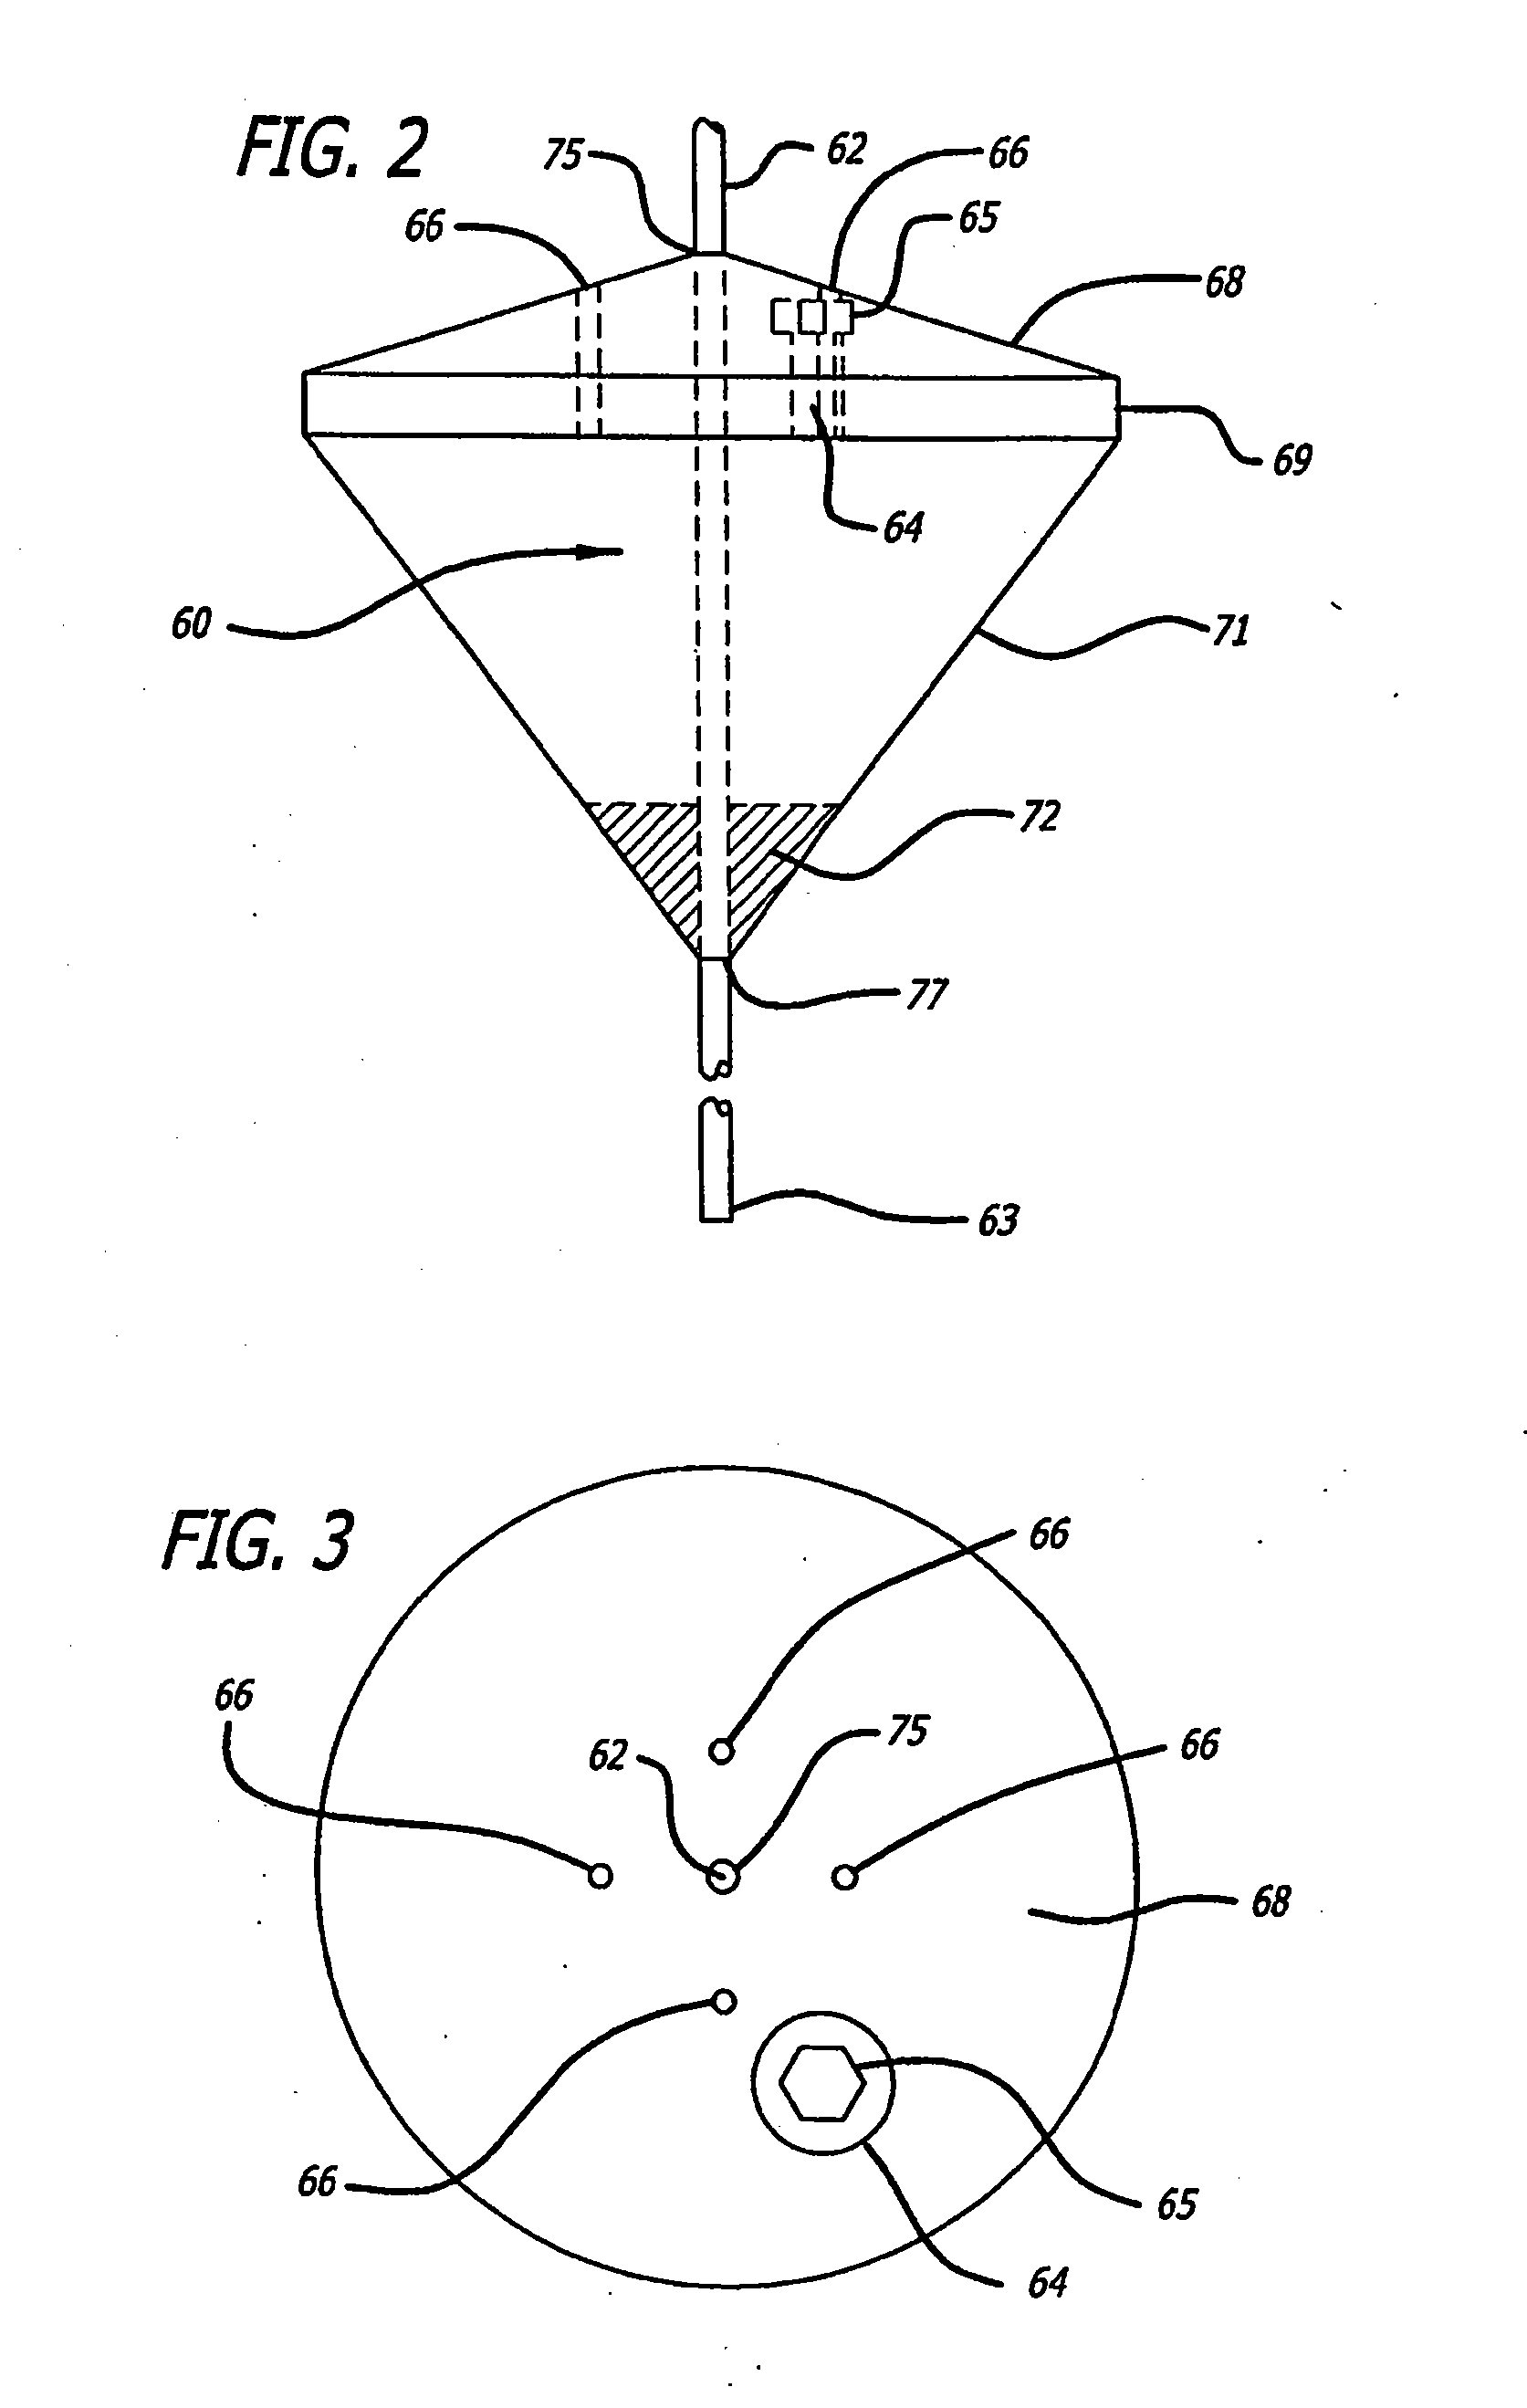 Refillable material transfer system